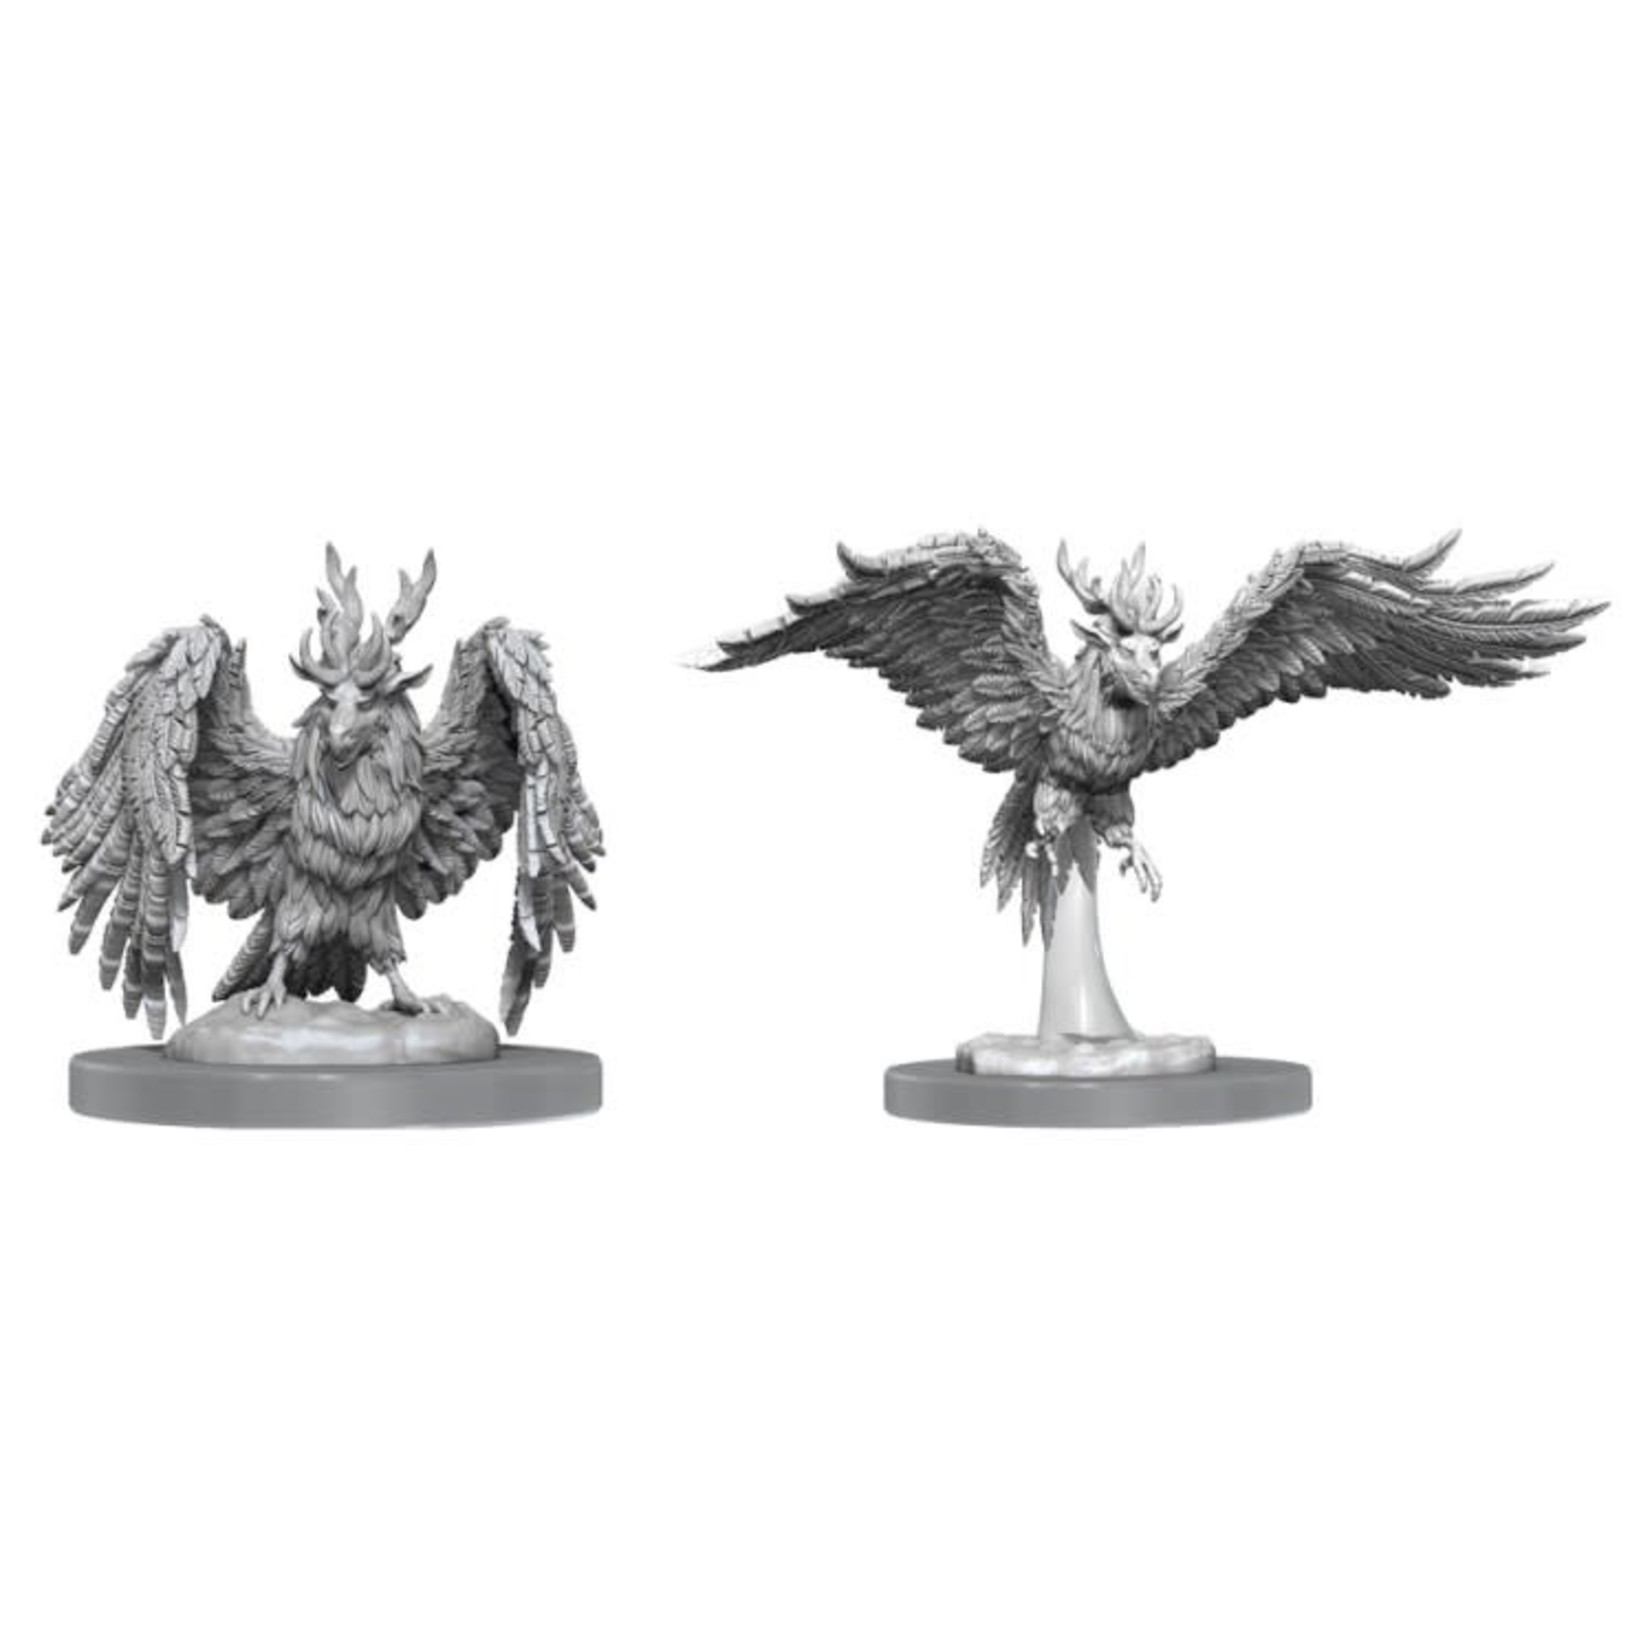 WizKids Dungeons and Dragons Nolzur's Marvelous Minis Perytons